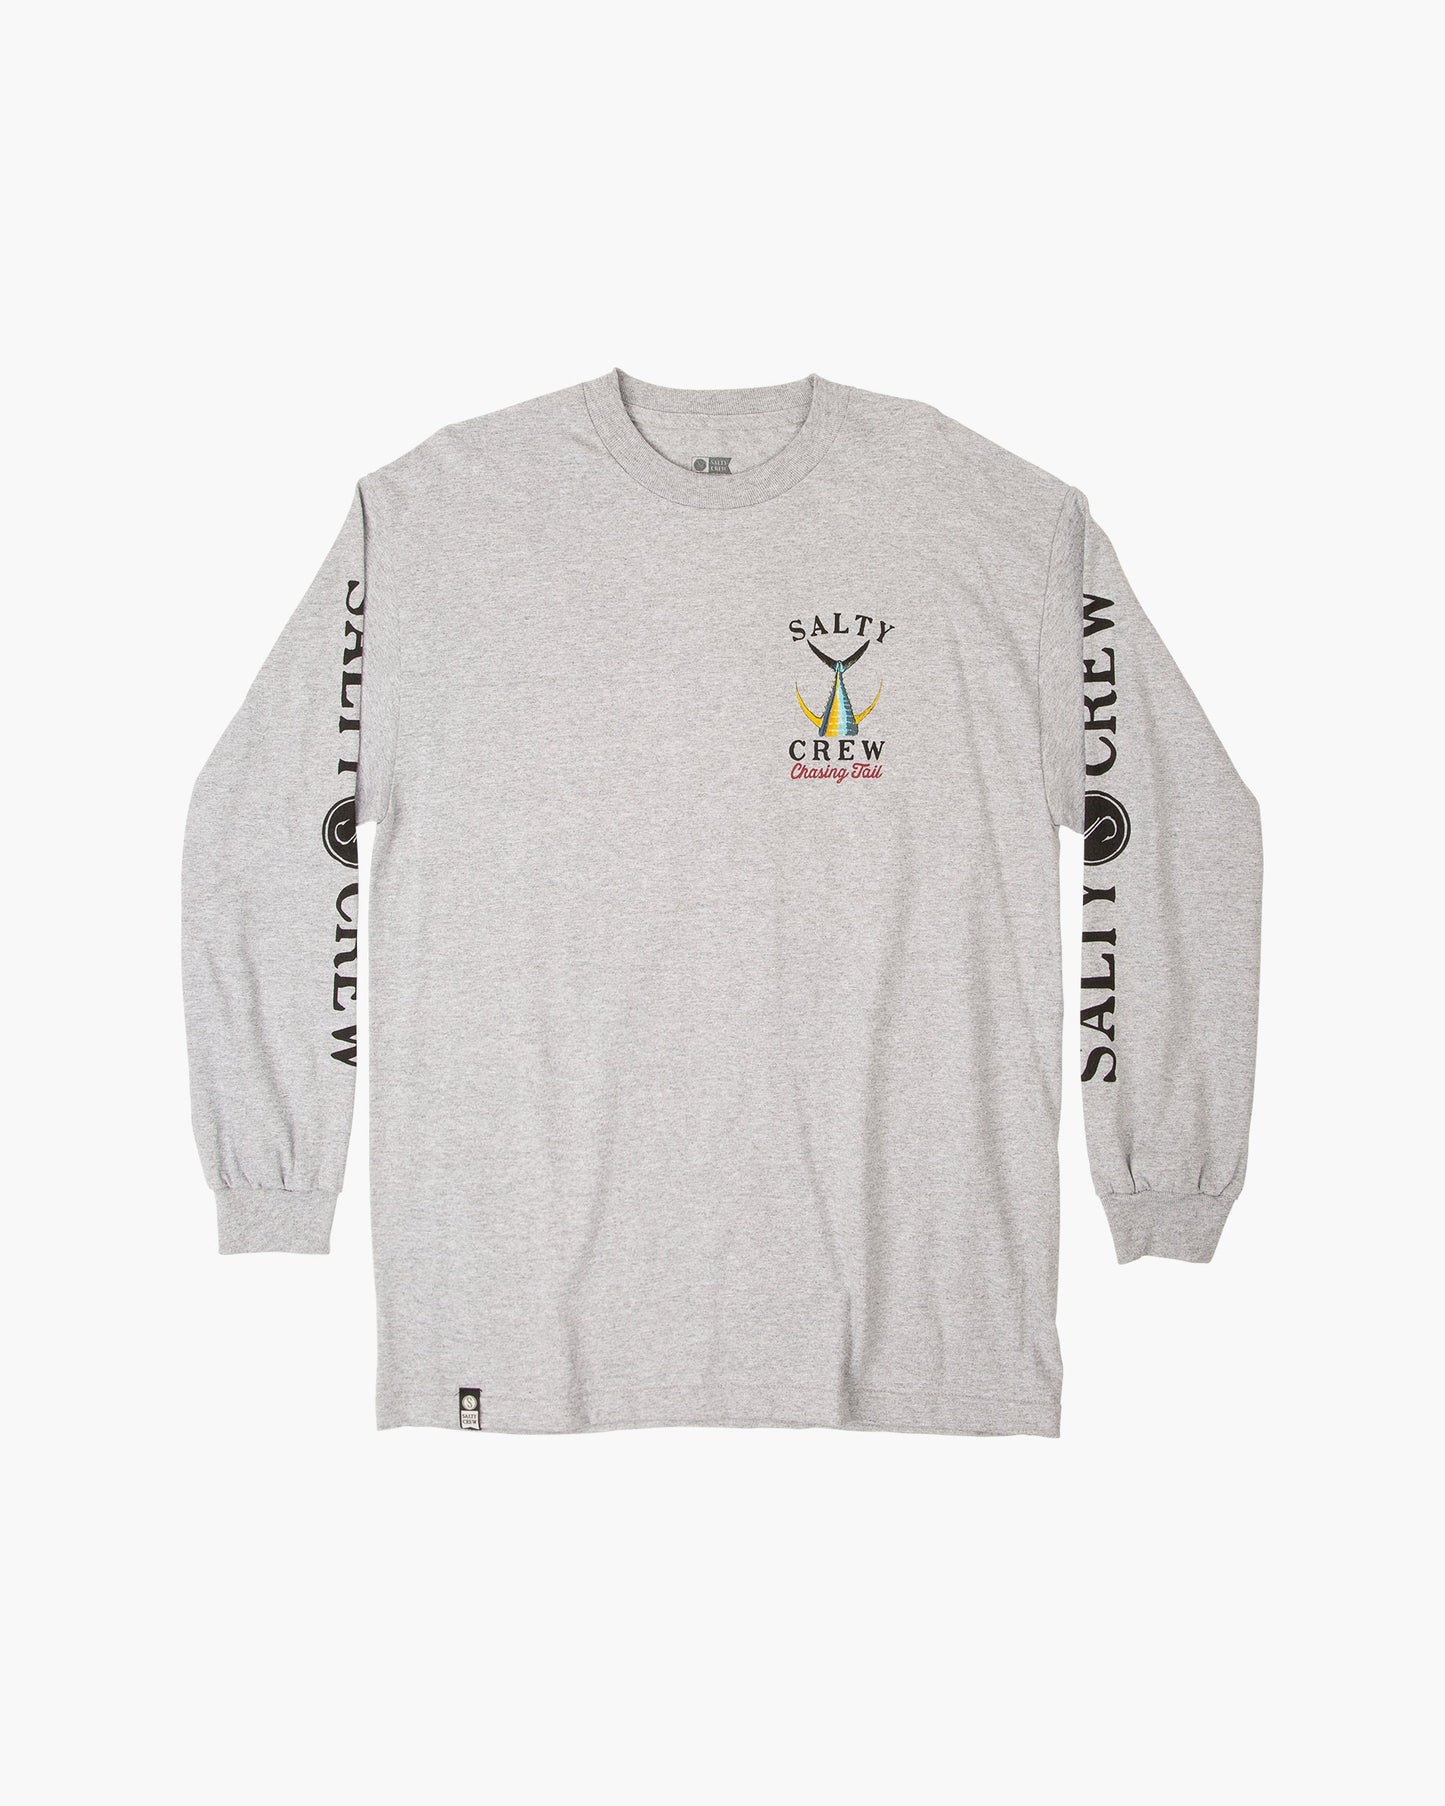 Tailed L/S Tee - Athletic Heather